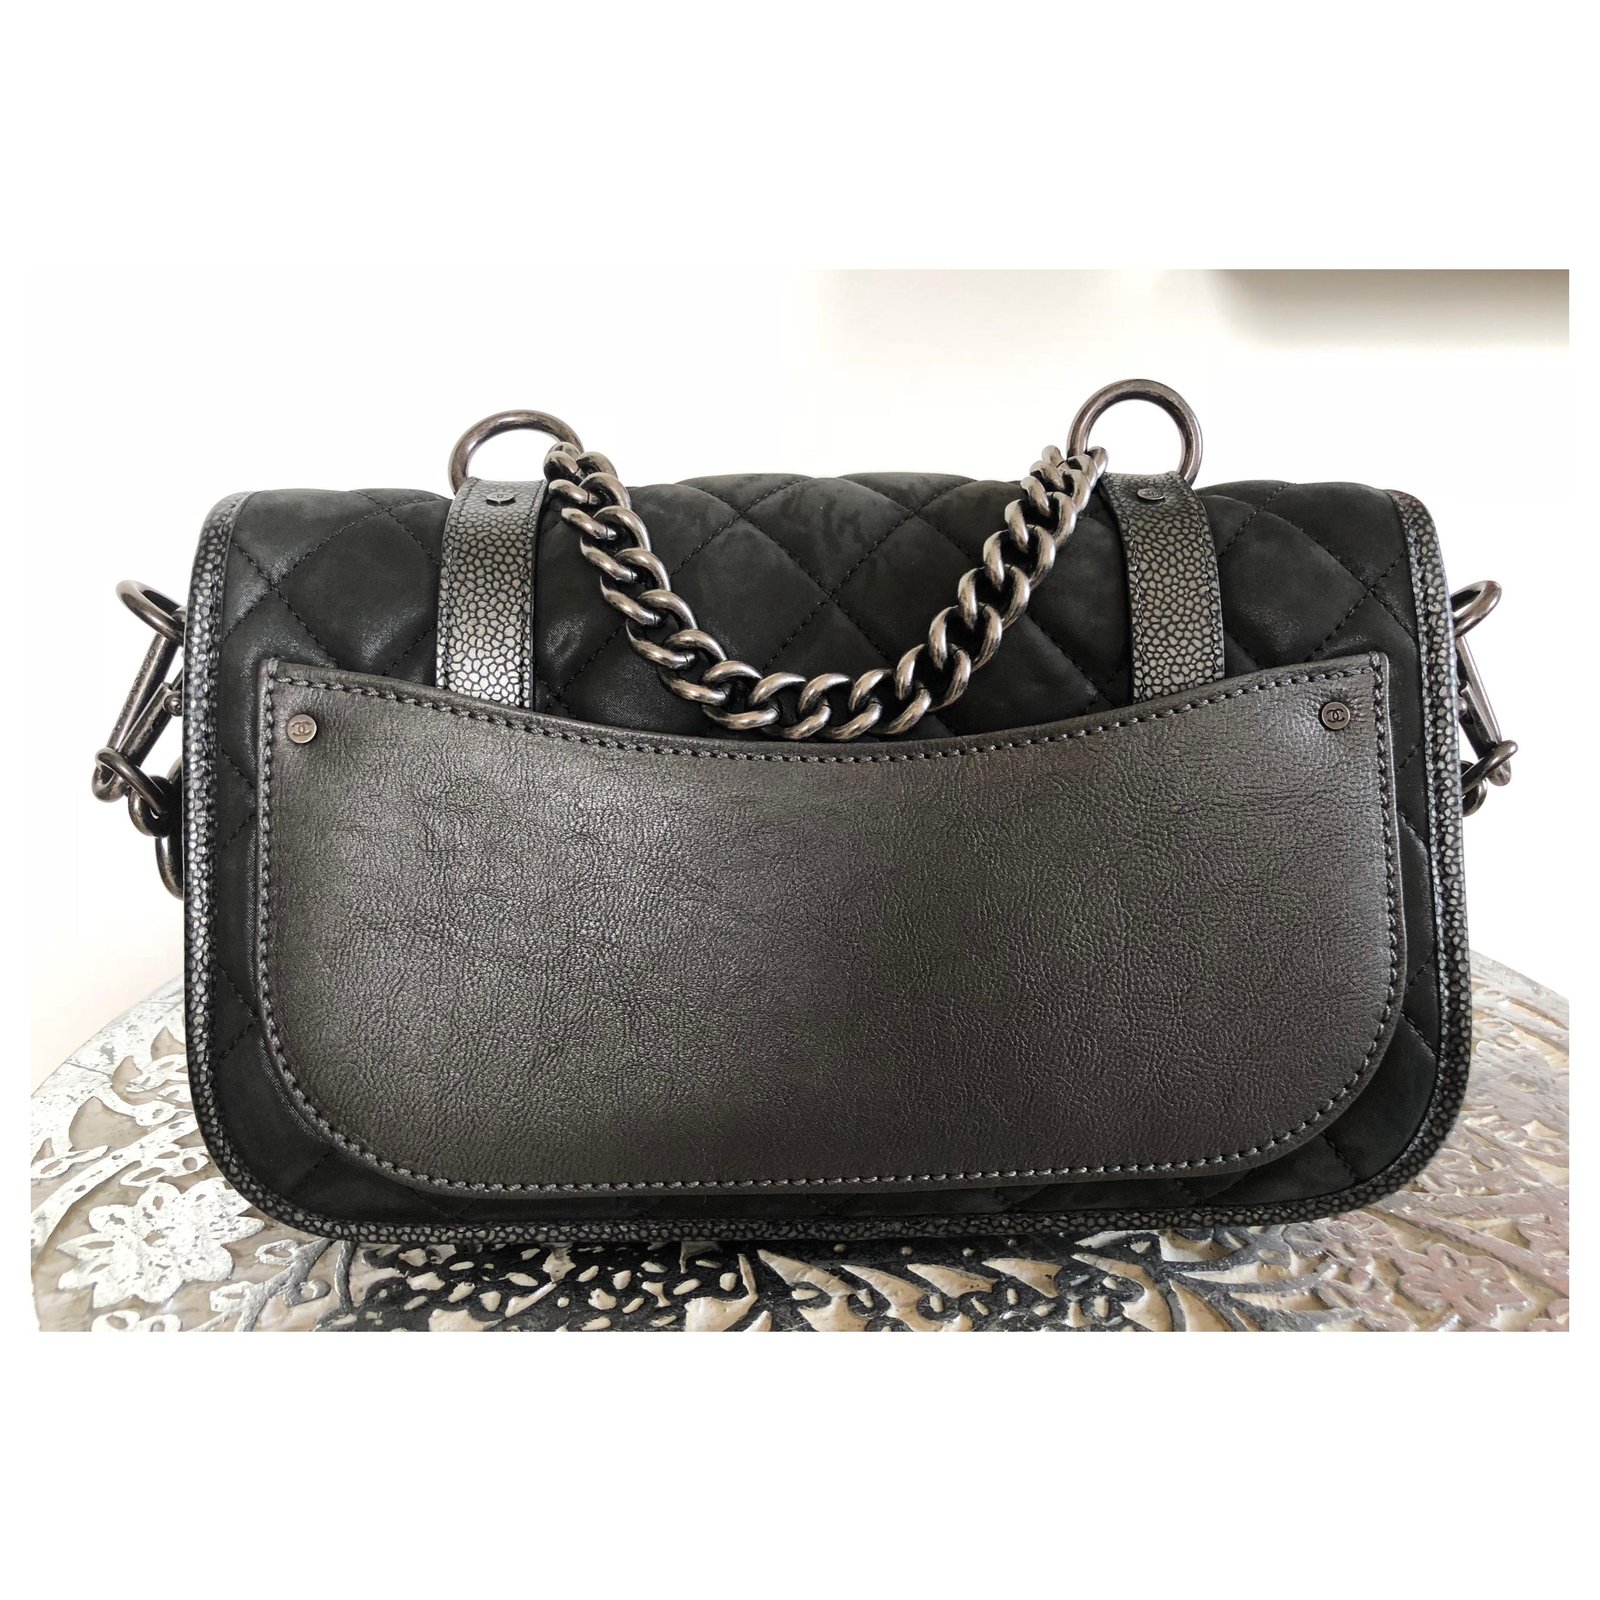 Chanel 2019 Grey Lambskin Small Trendy Top Handle Bag With Strap